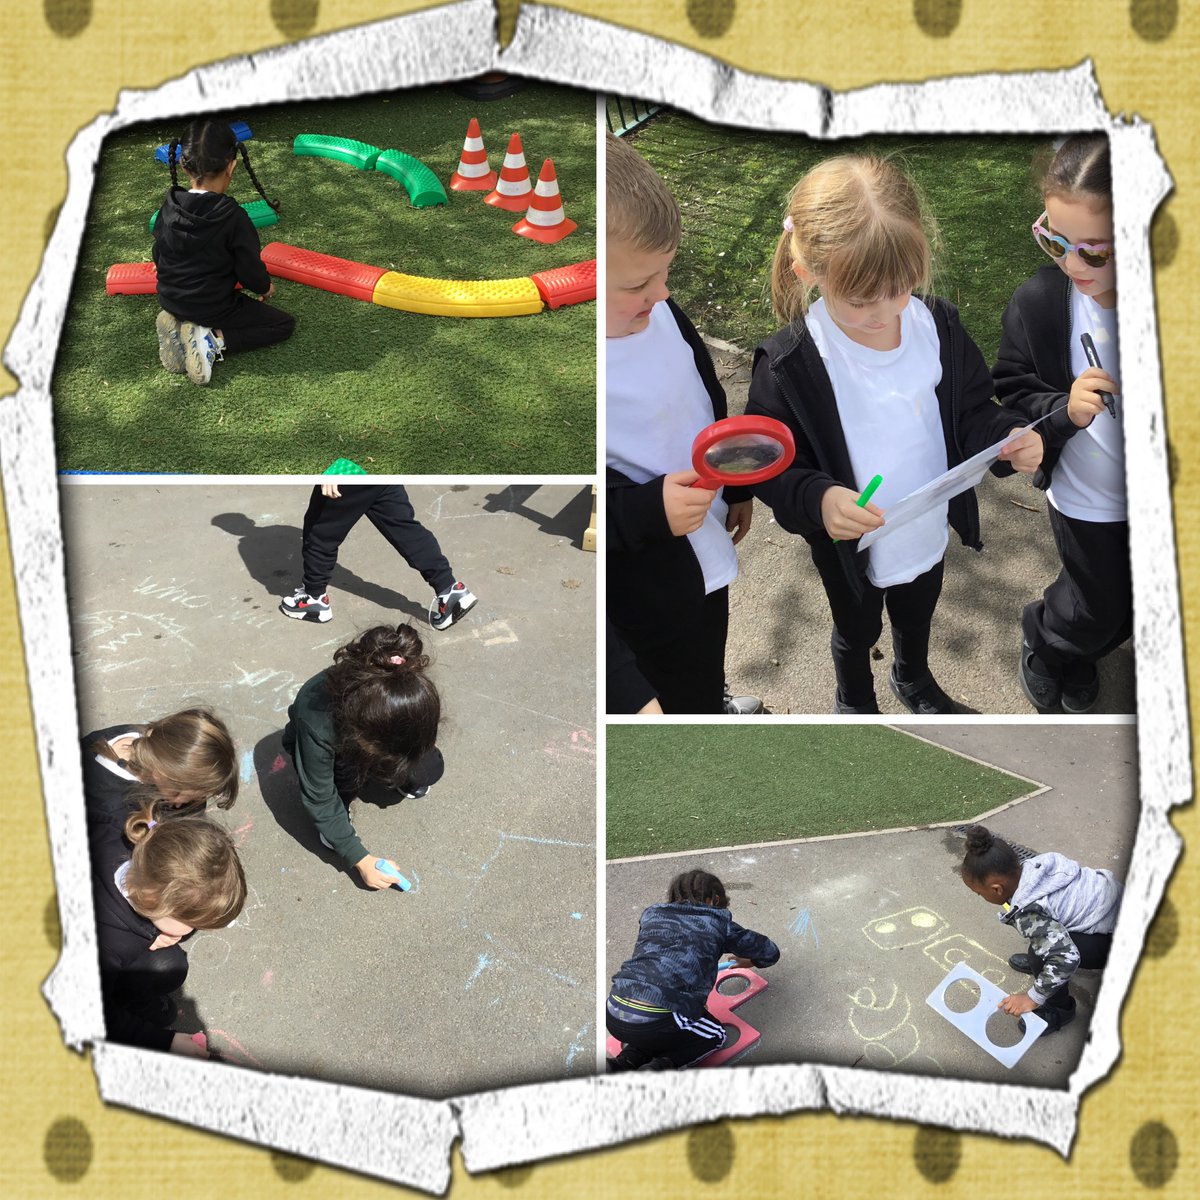 In reception, the children have enjoyed learning outdoors. We revisited our prior skills of making 9 and 10, going on a minibeast hunt, and creating enclosures for the farm animals!
#outdoorlearning#bigmaths#workingtogether